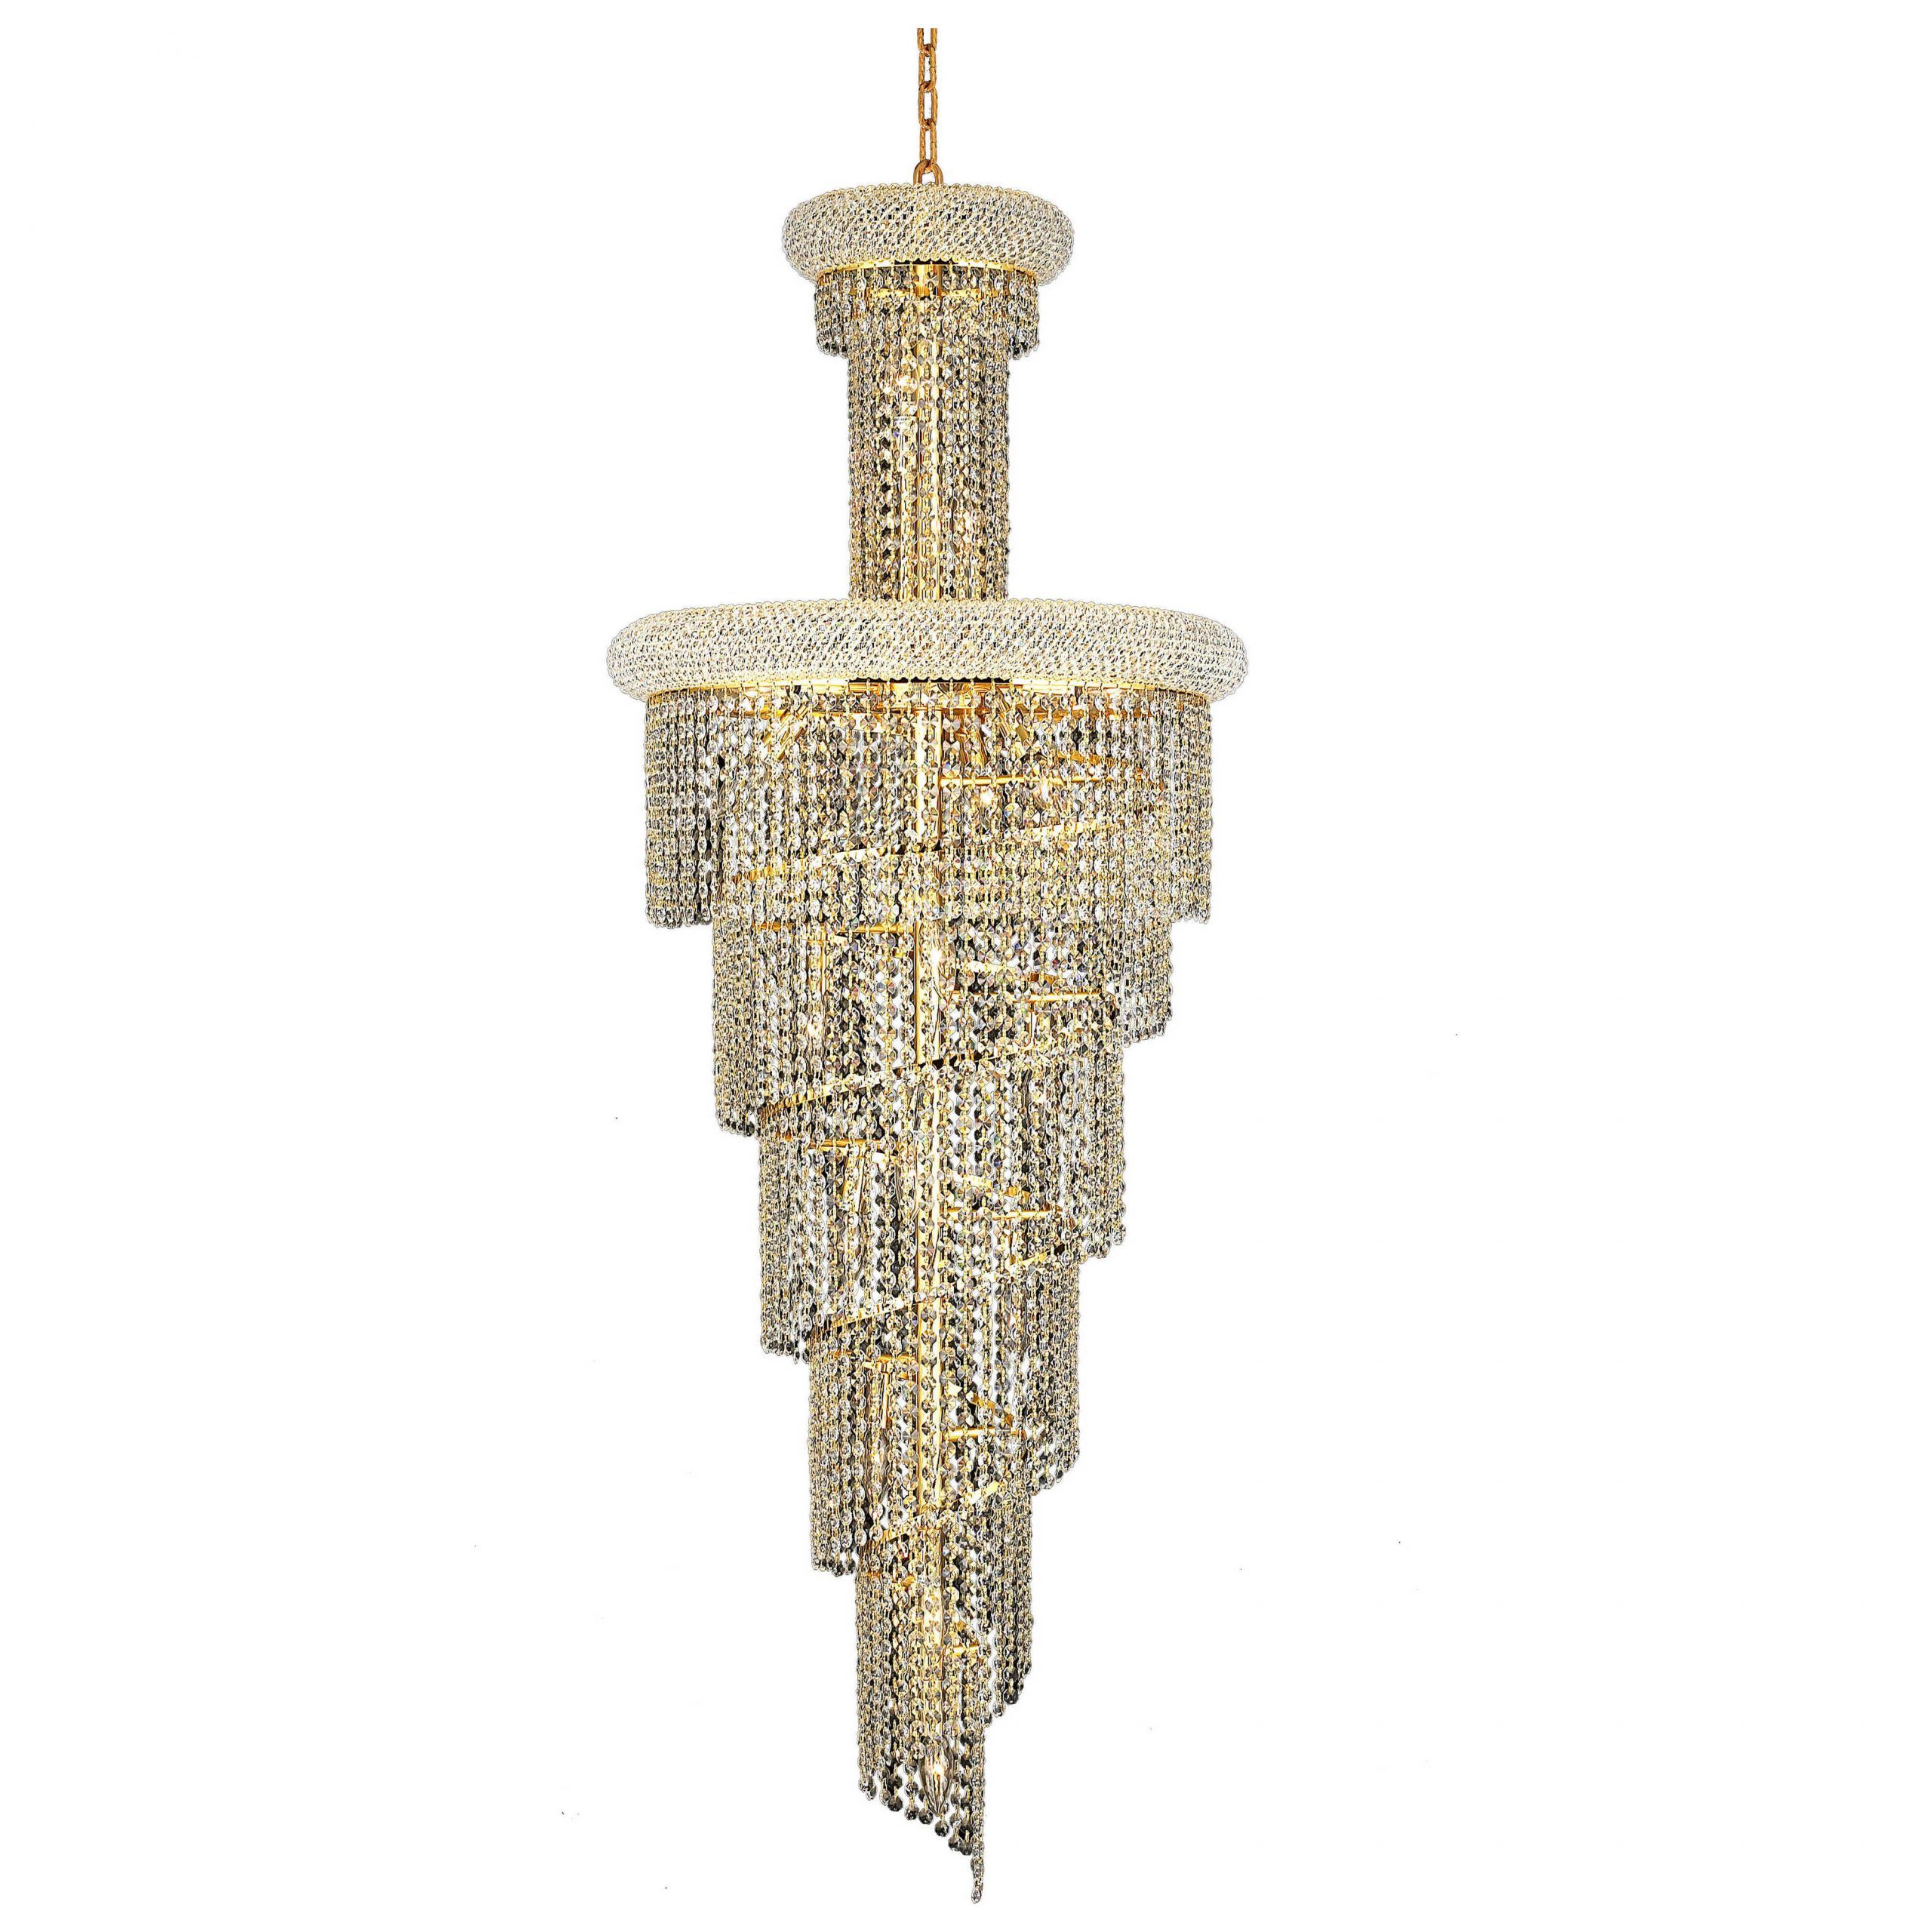 Elegant Lighting Spiral Royal Cut Gold & Crystal 22 Light In Royal Cut Crystal Chandeliers (View 6 of 15)